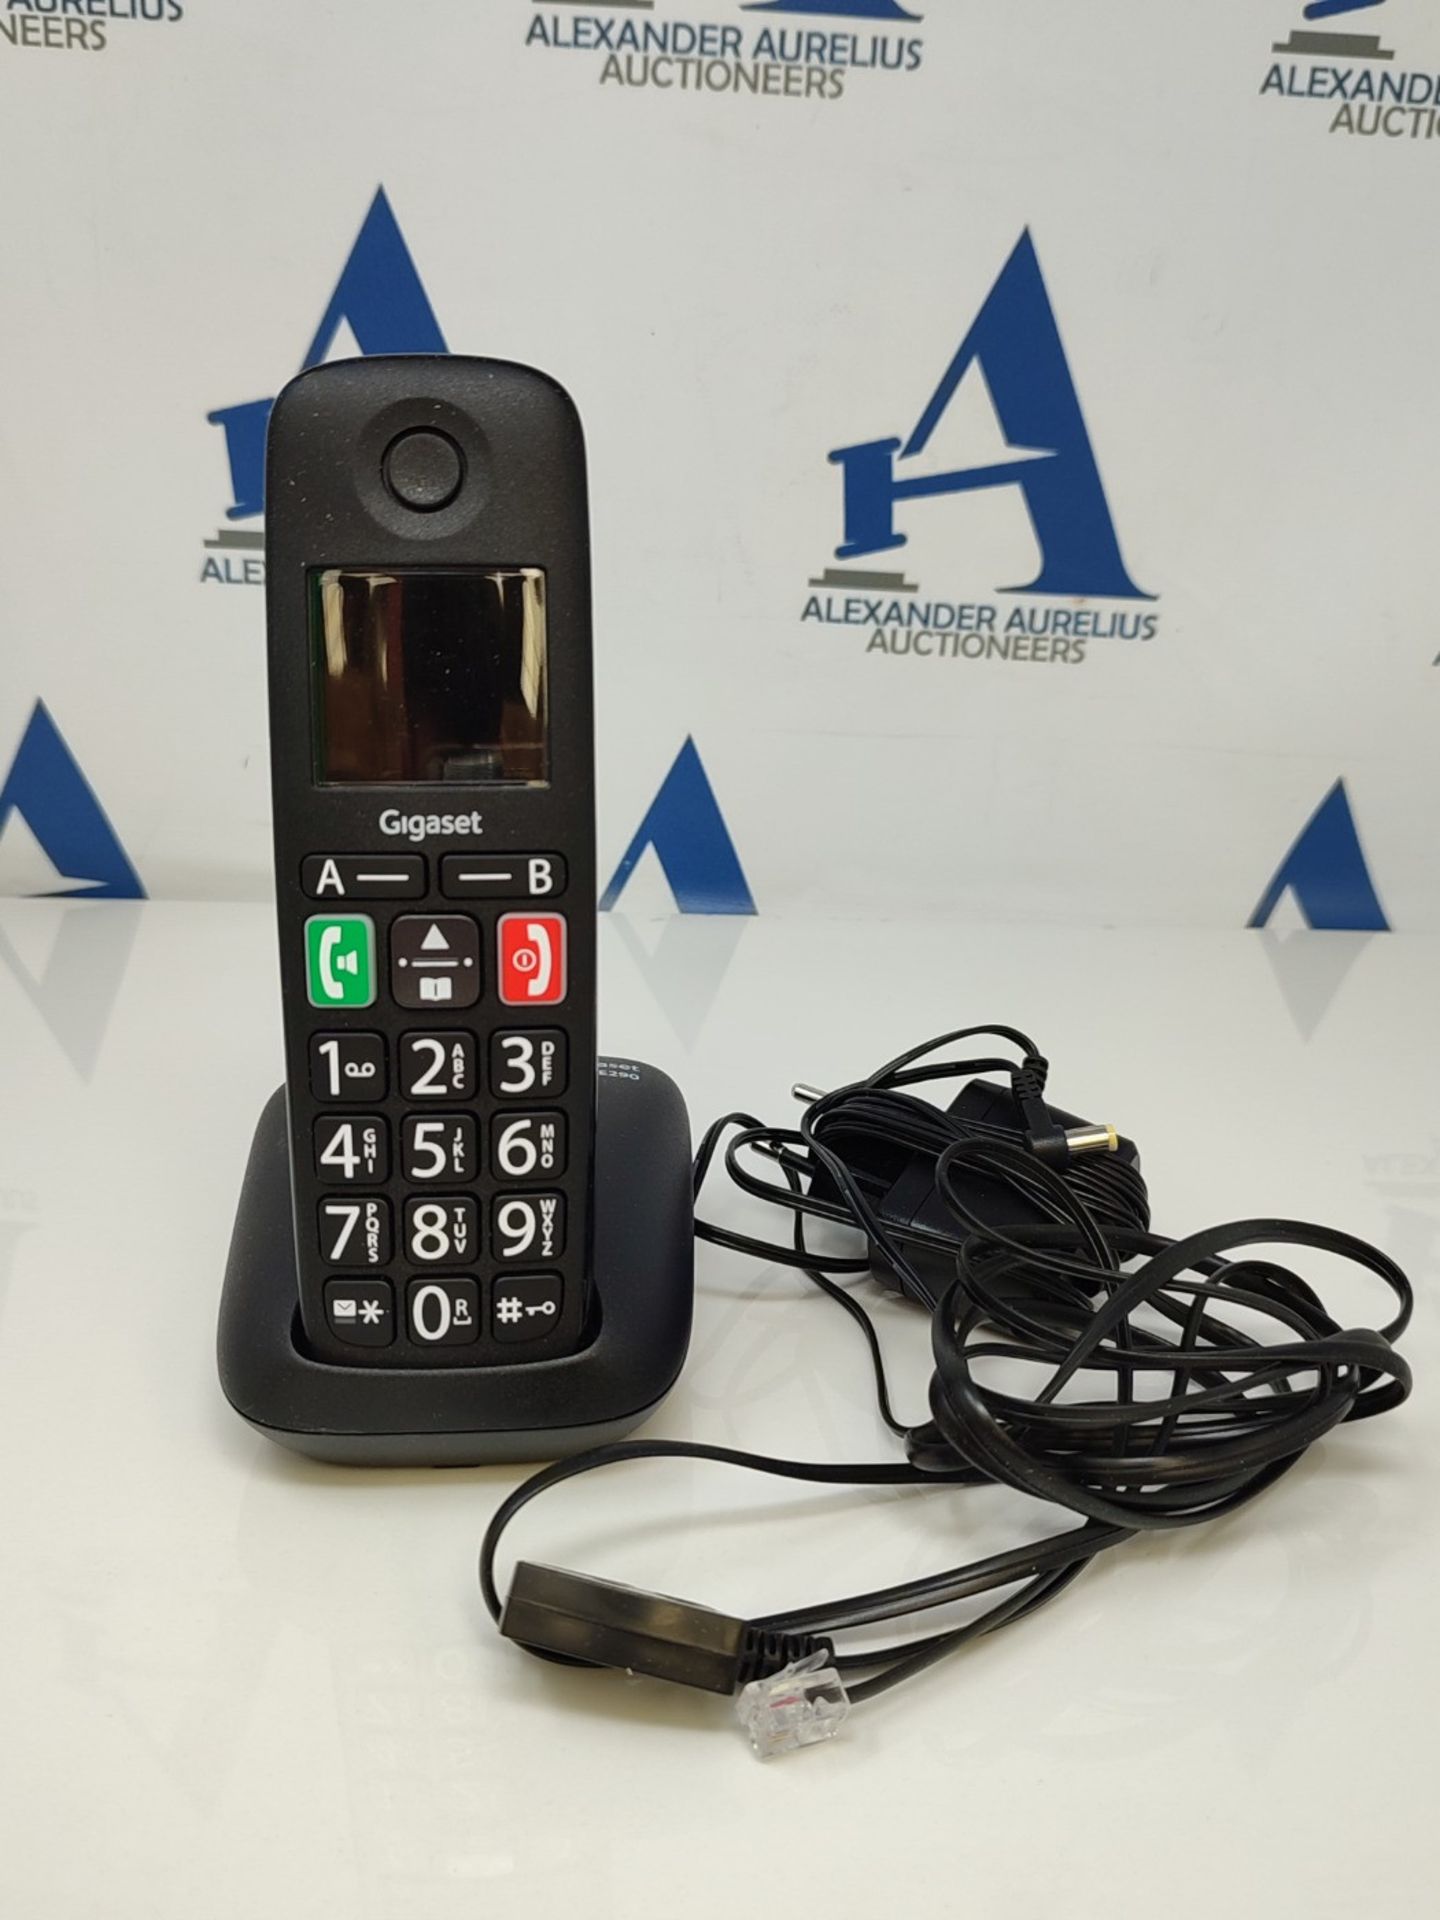 Gigaset E290 - Cordless senior phone without answering machine with large buttons - la - Image 2 of 4